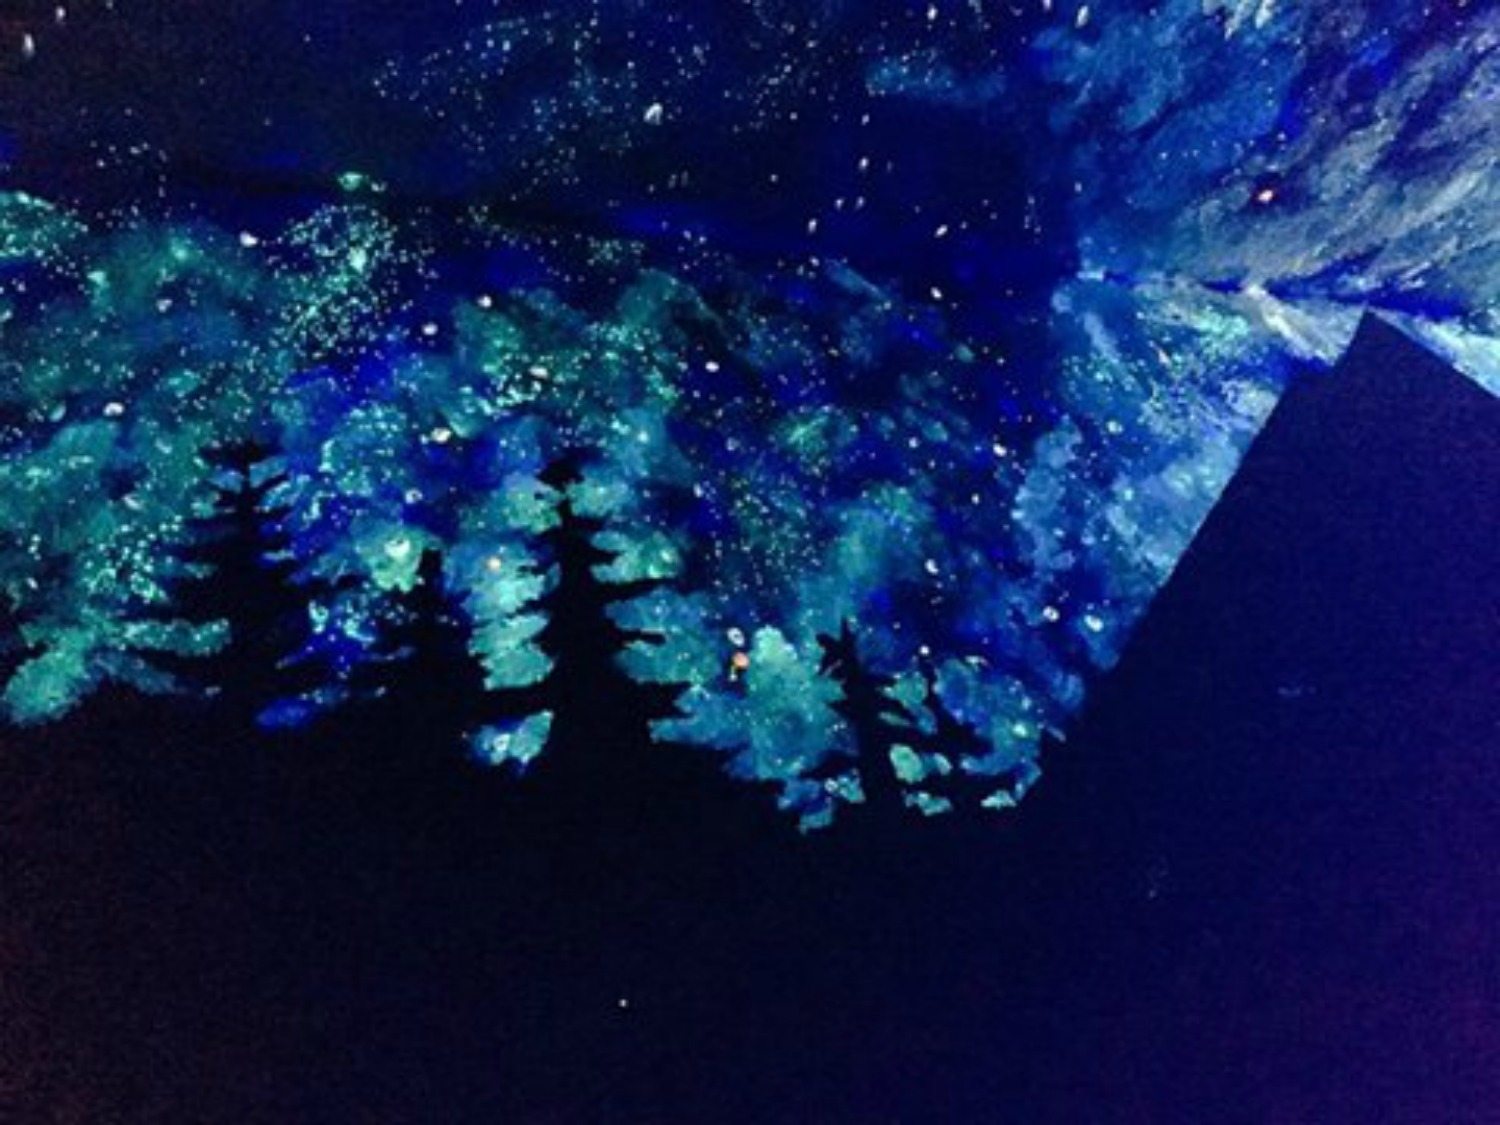 Diy Glow In The Dark Ceiling With Stars Northern Lights And More